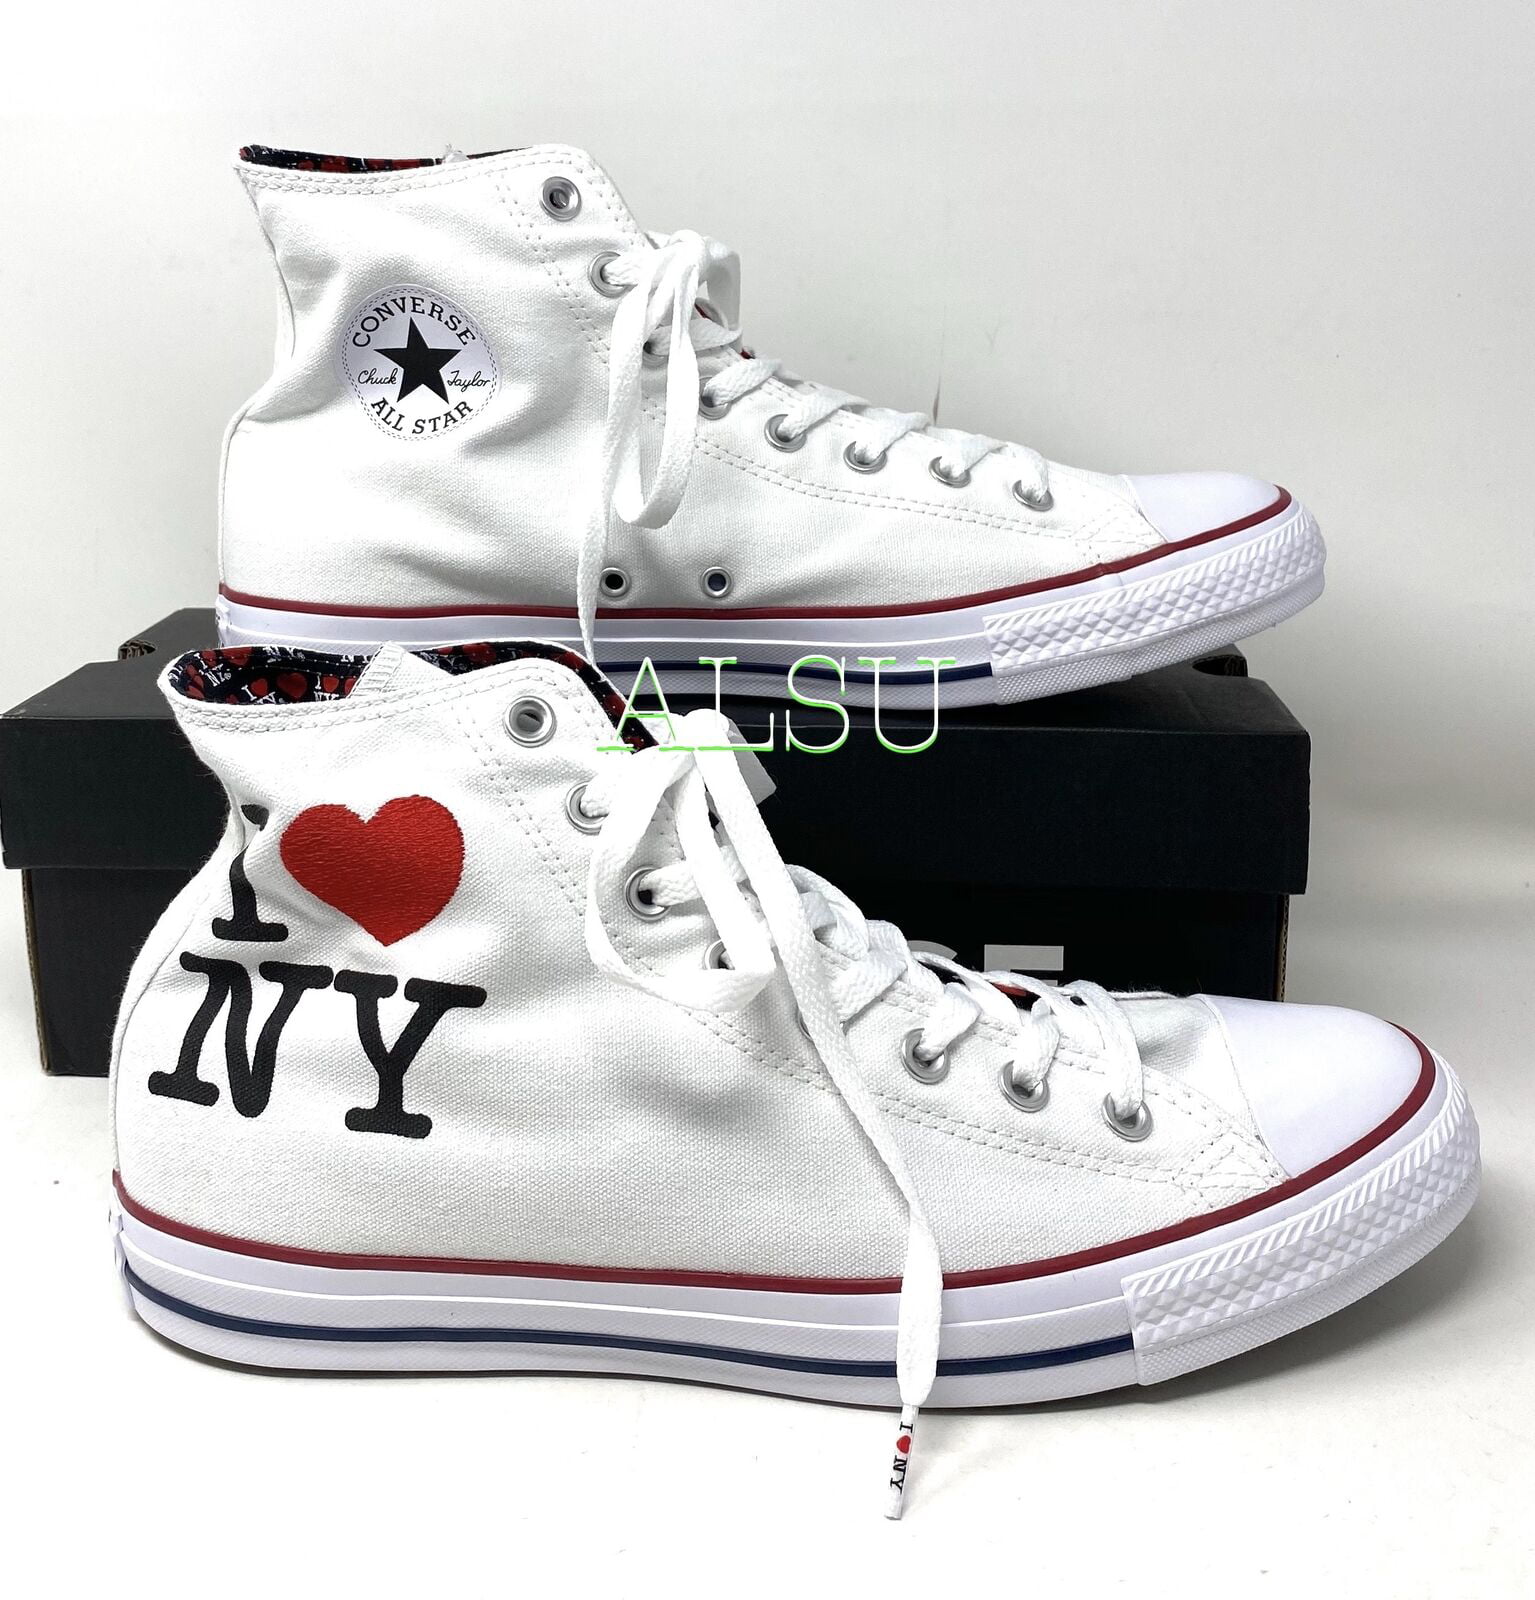 Converse Chuck AS High Top Canvas I Love NY White Men's Sneakers 161184F -